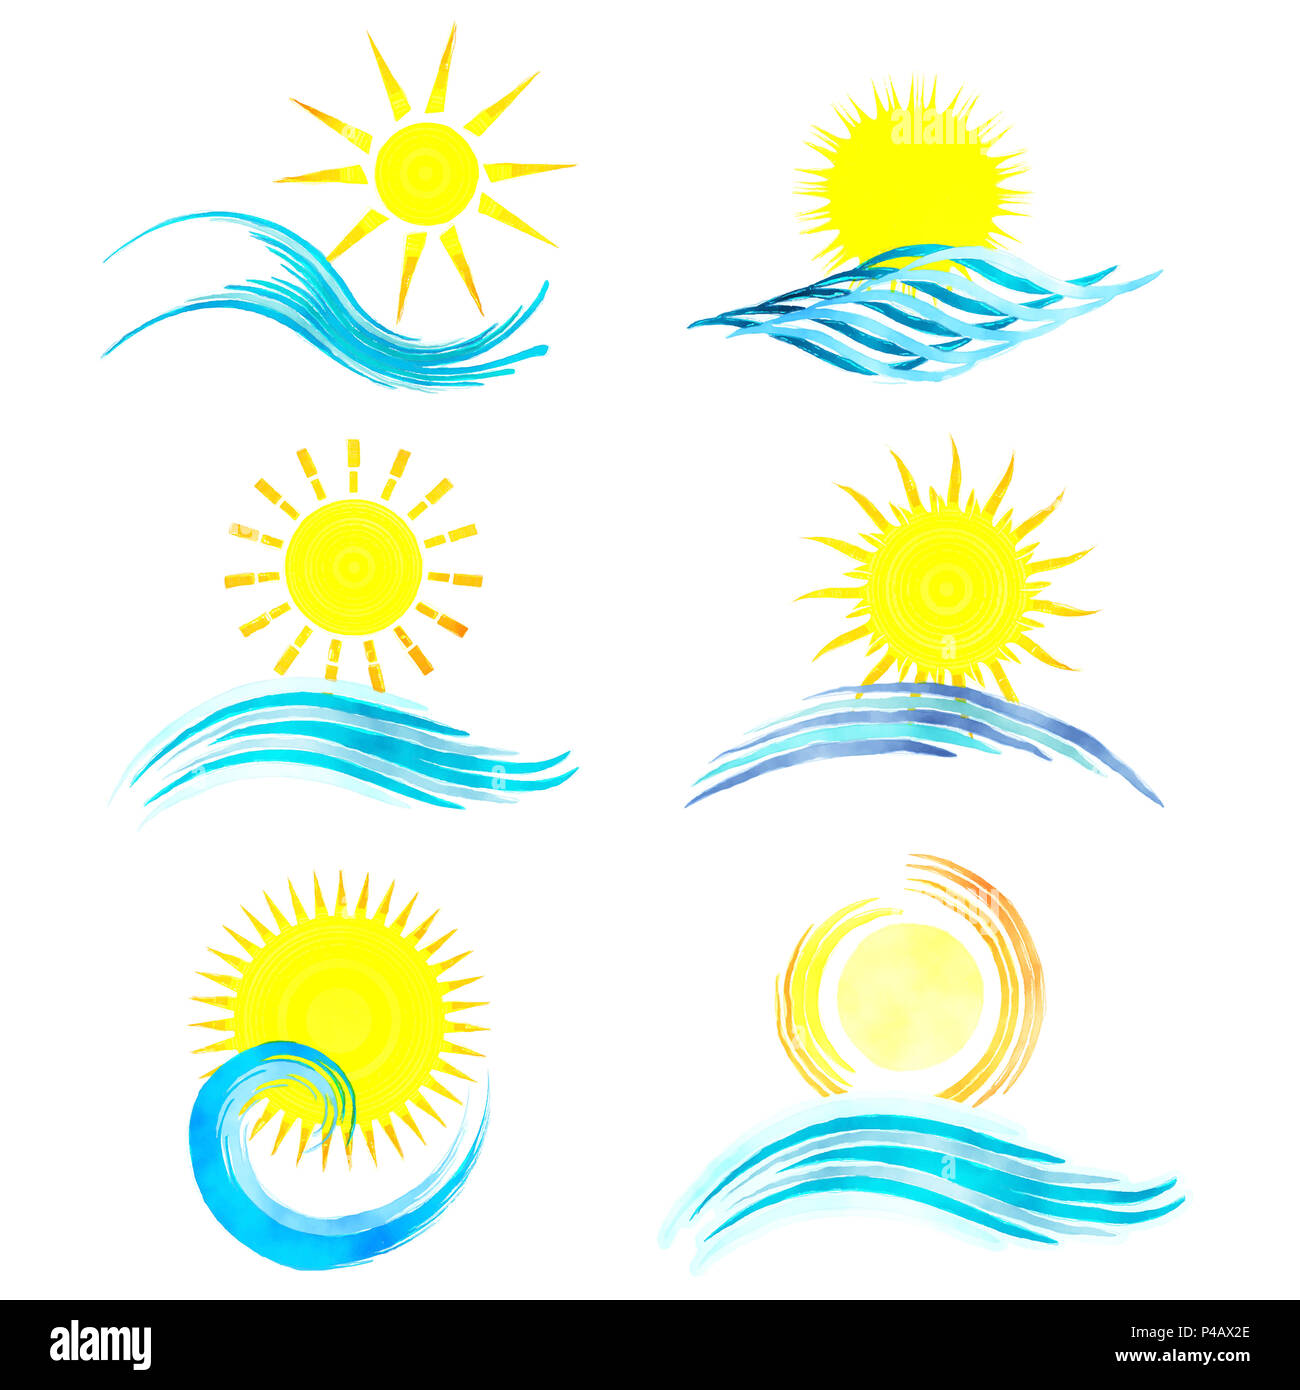 Collection of watercolor styled summer icons Stock Photo